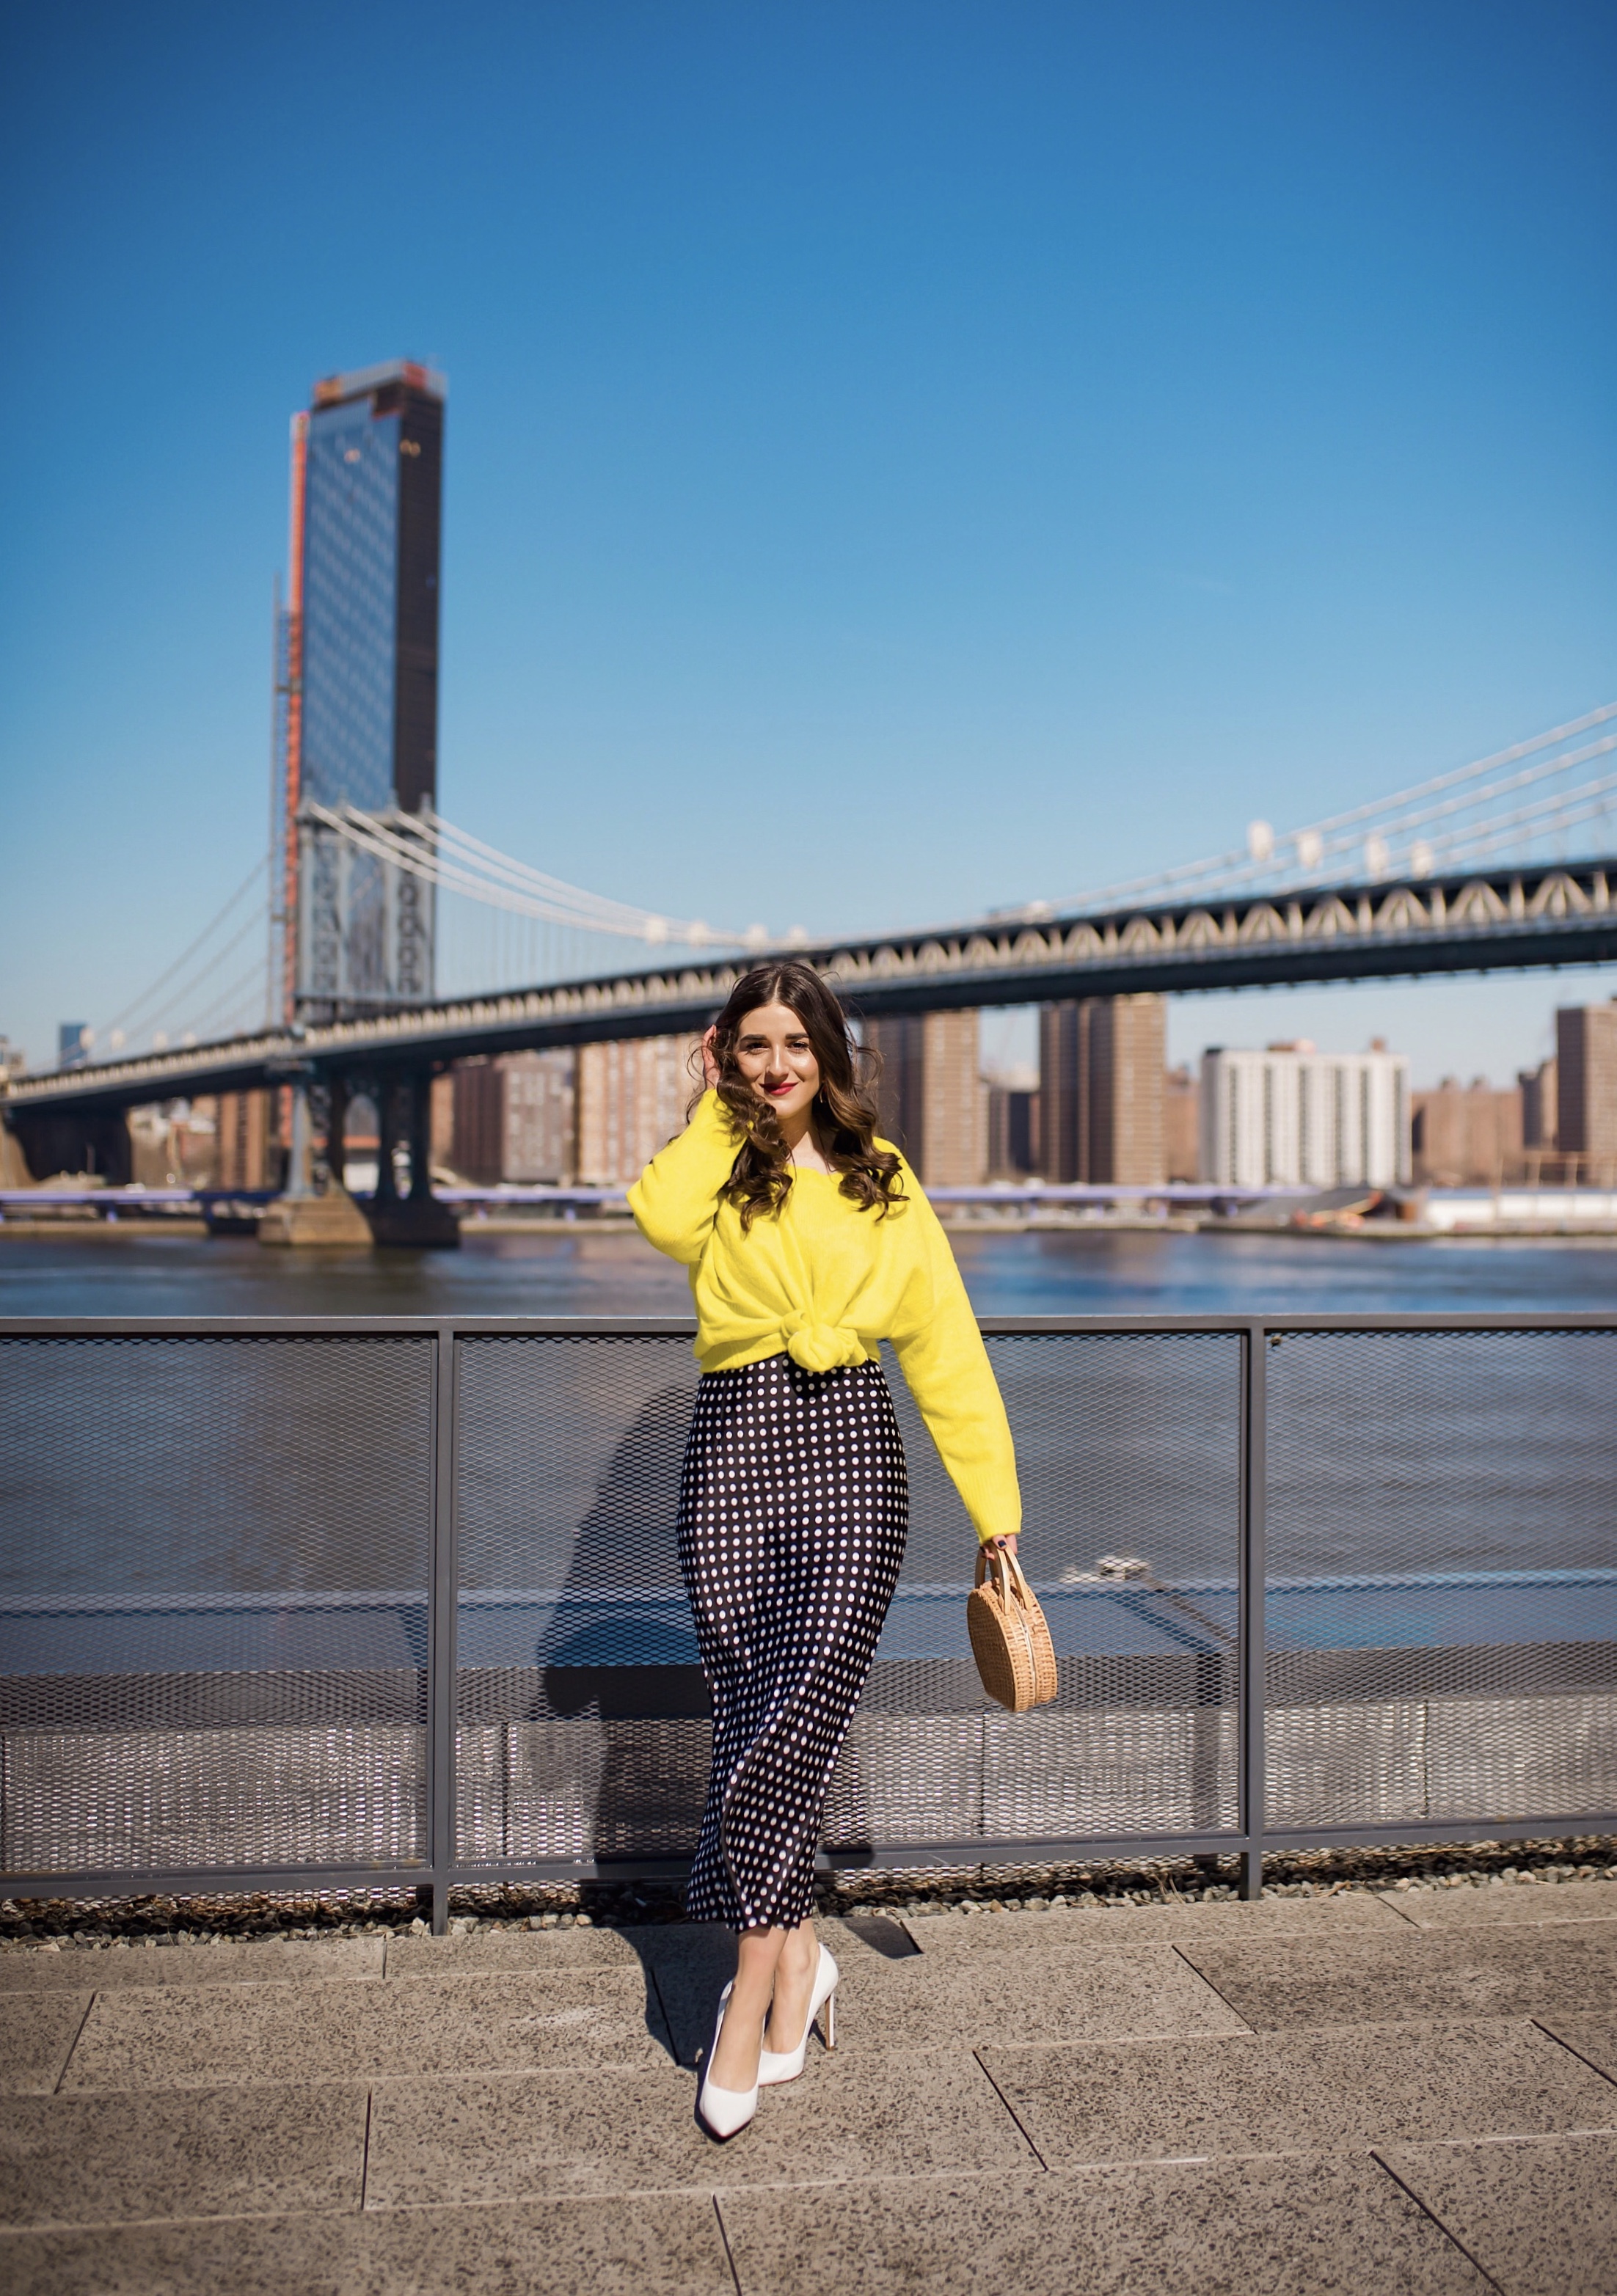 How I Wound Up With Boring White Dishes Navy Polka Dot Dress Neon Yellow Knotted Sweater Esther Santer Fashion Blog NYC Street Style Blogger Outfit OOTD Trendy Shopping Girl What How To Wear White Heels Laurel Creative Photoshoot Dumbo Brooklyn Bridge.JPG